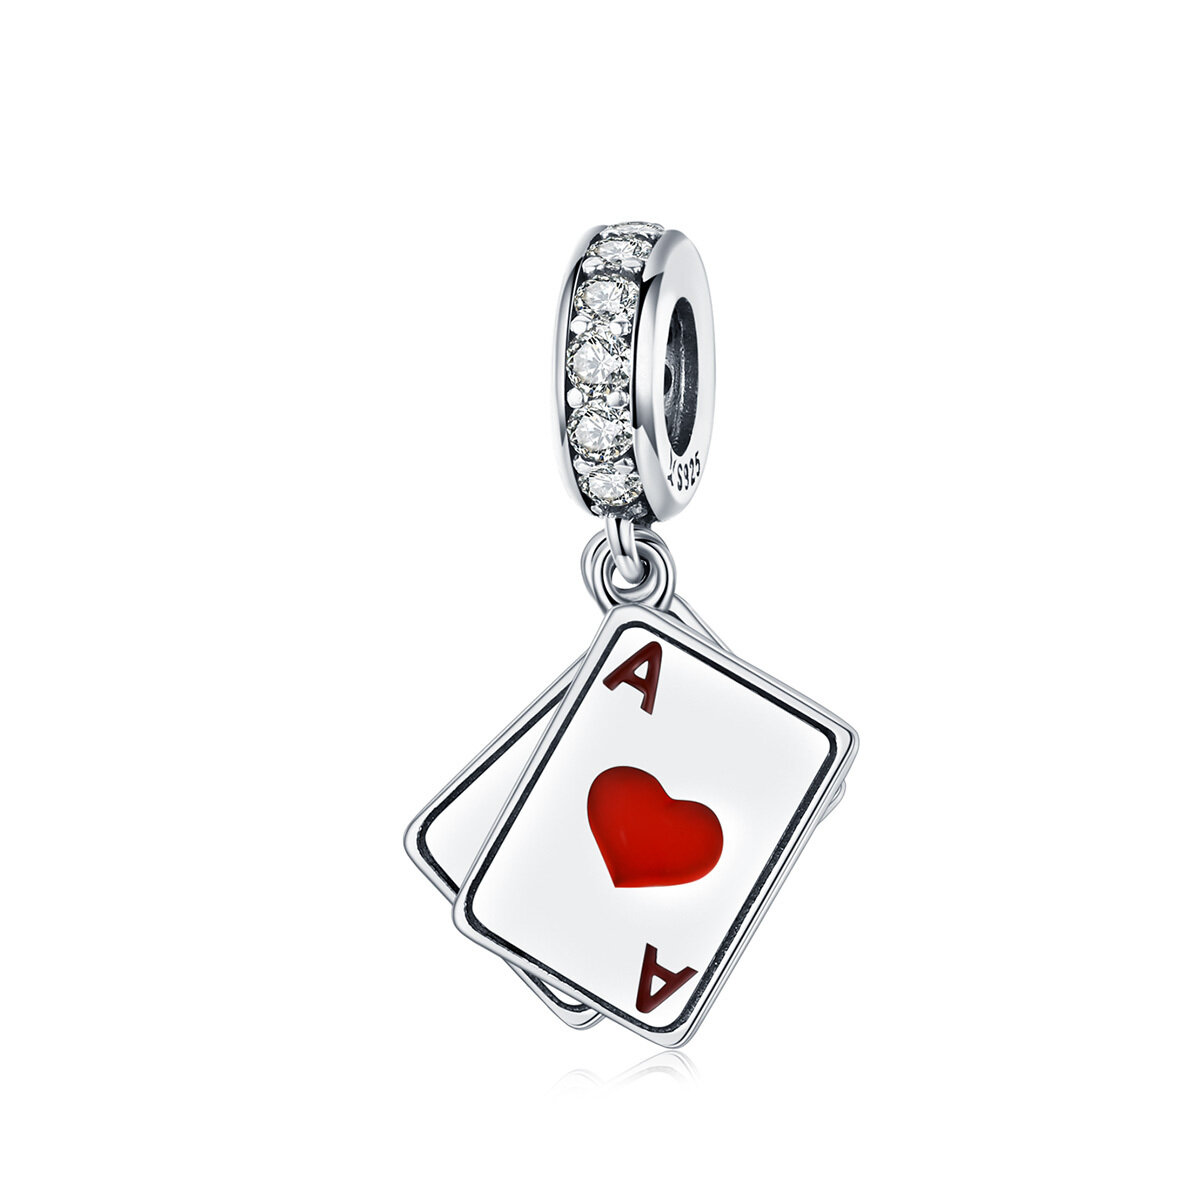 GemKing SCC1172 Game Time S925 Sterling Silver Charm